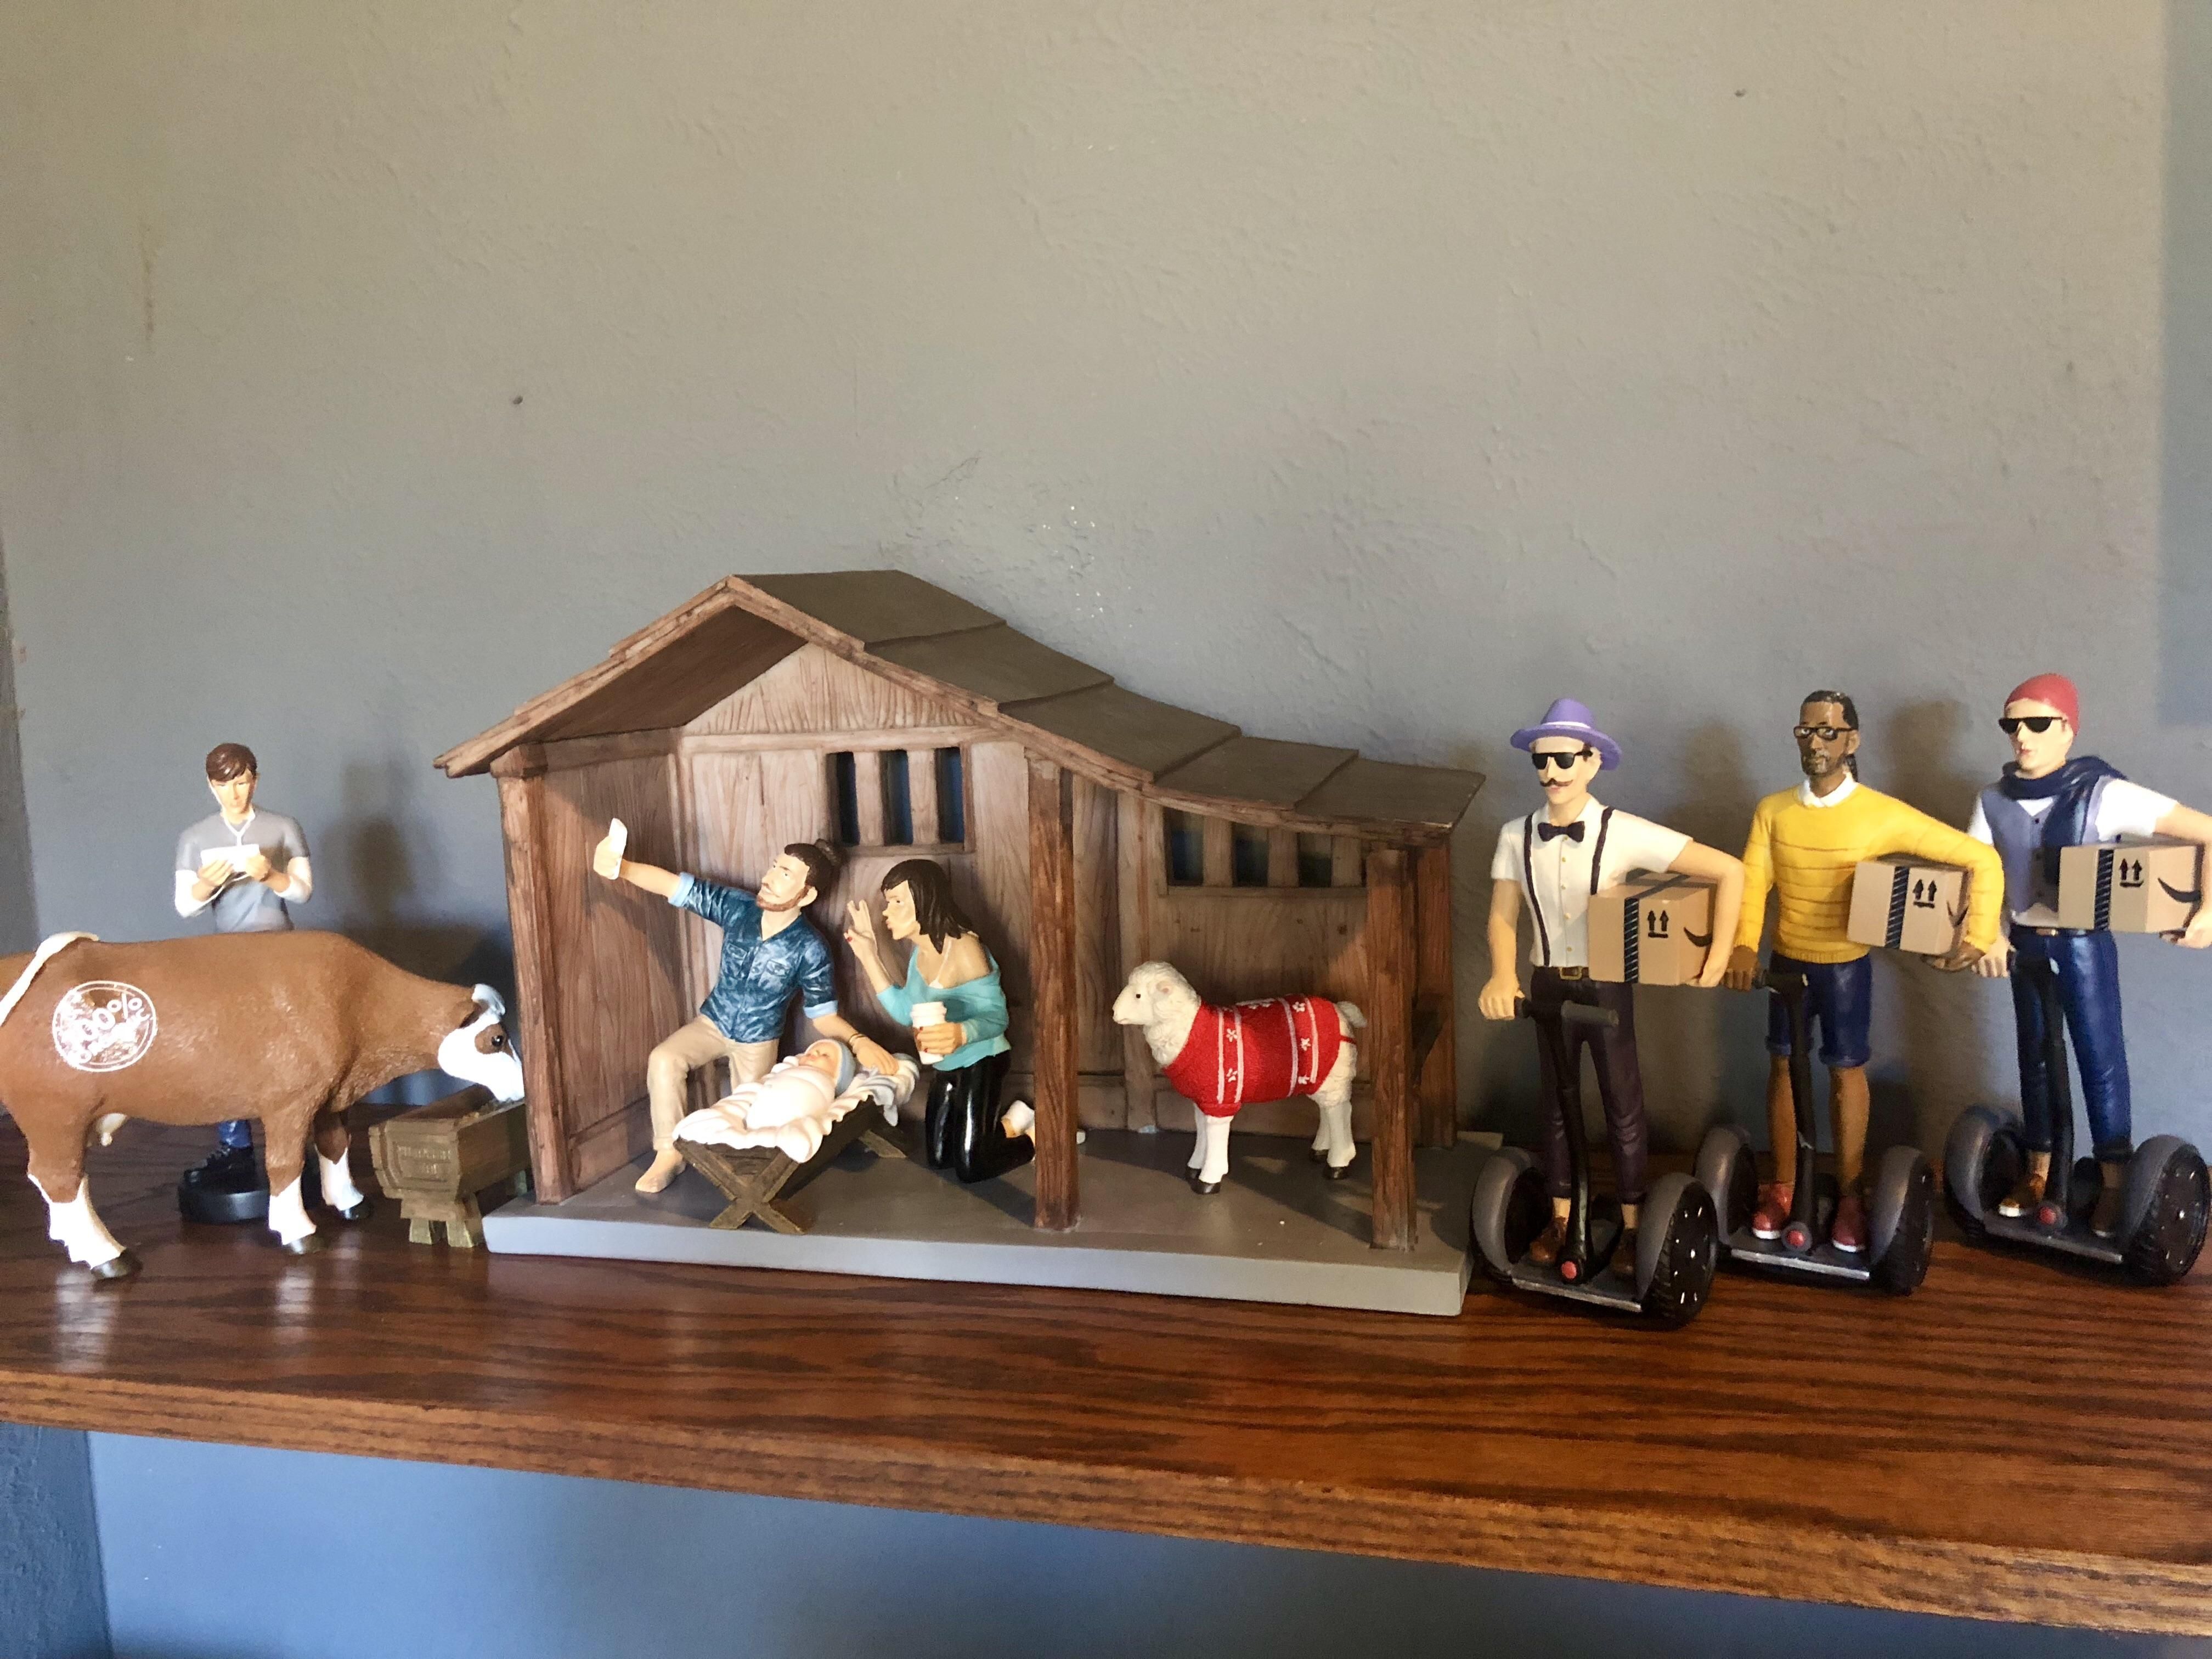 First year putting up our “millennial nativity scene.”